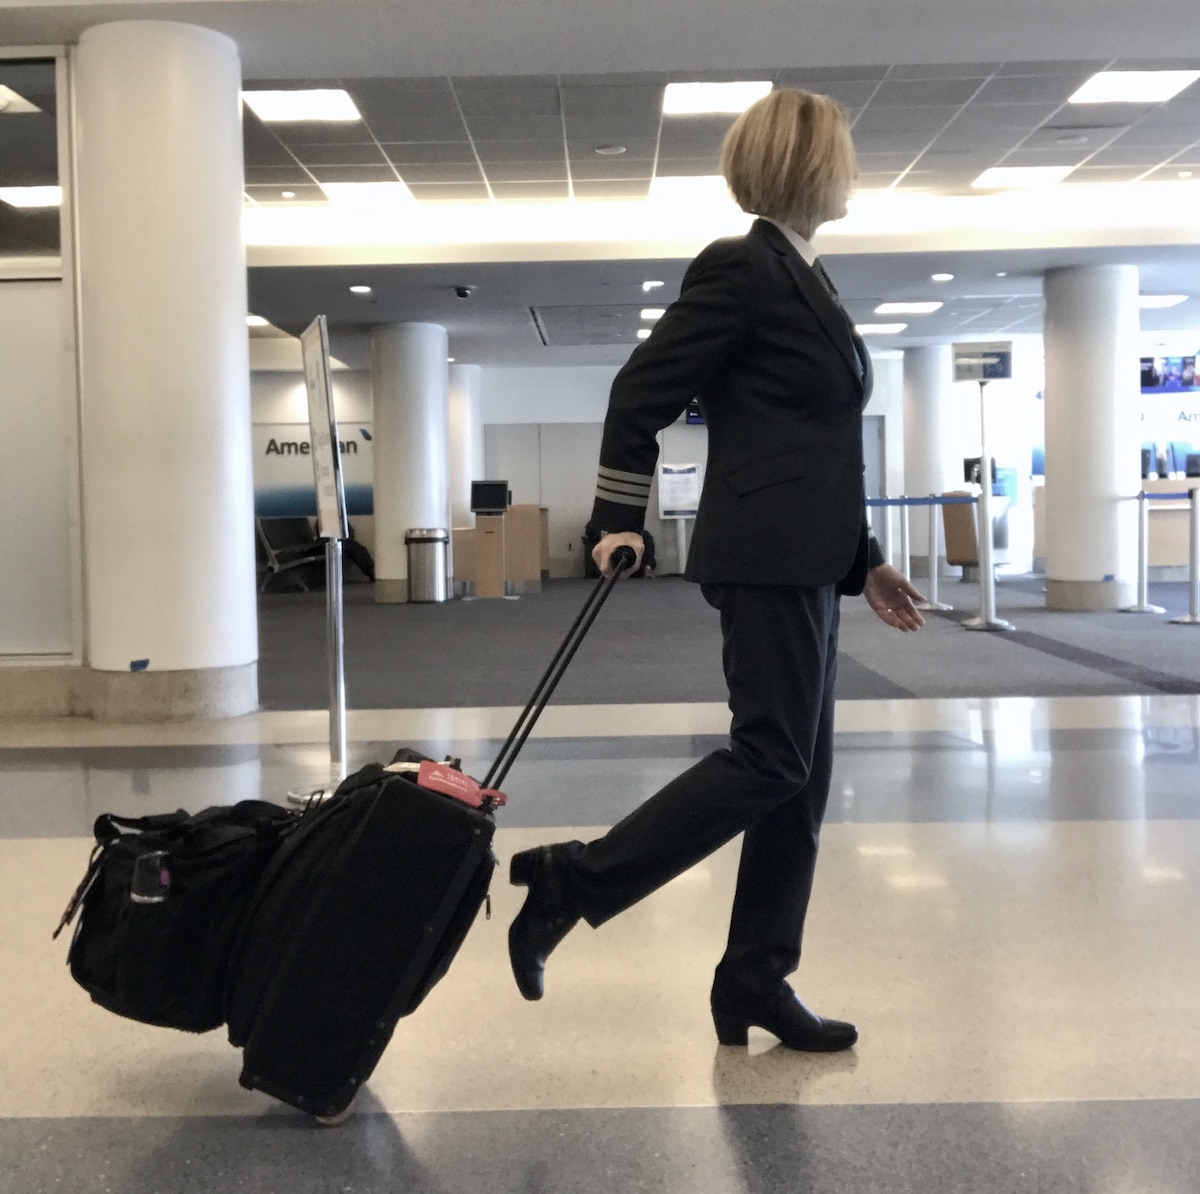 https://www.travelawaits.com/wp-content/uploads/2022/05/Strolling-in-the-airport-with-a-carry-on-and-personal-bag.jpeg?fit=1200%2C1194